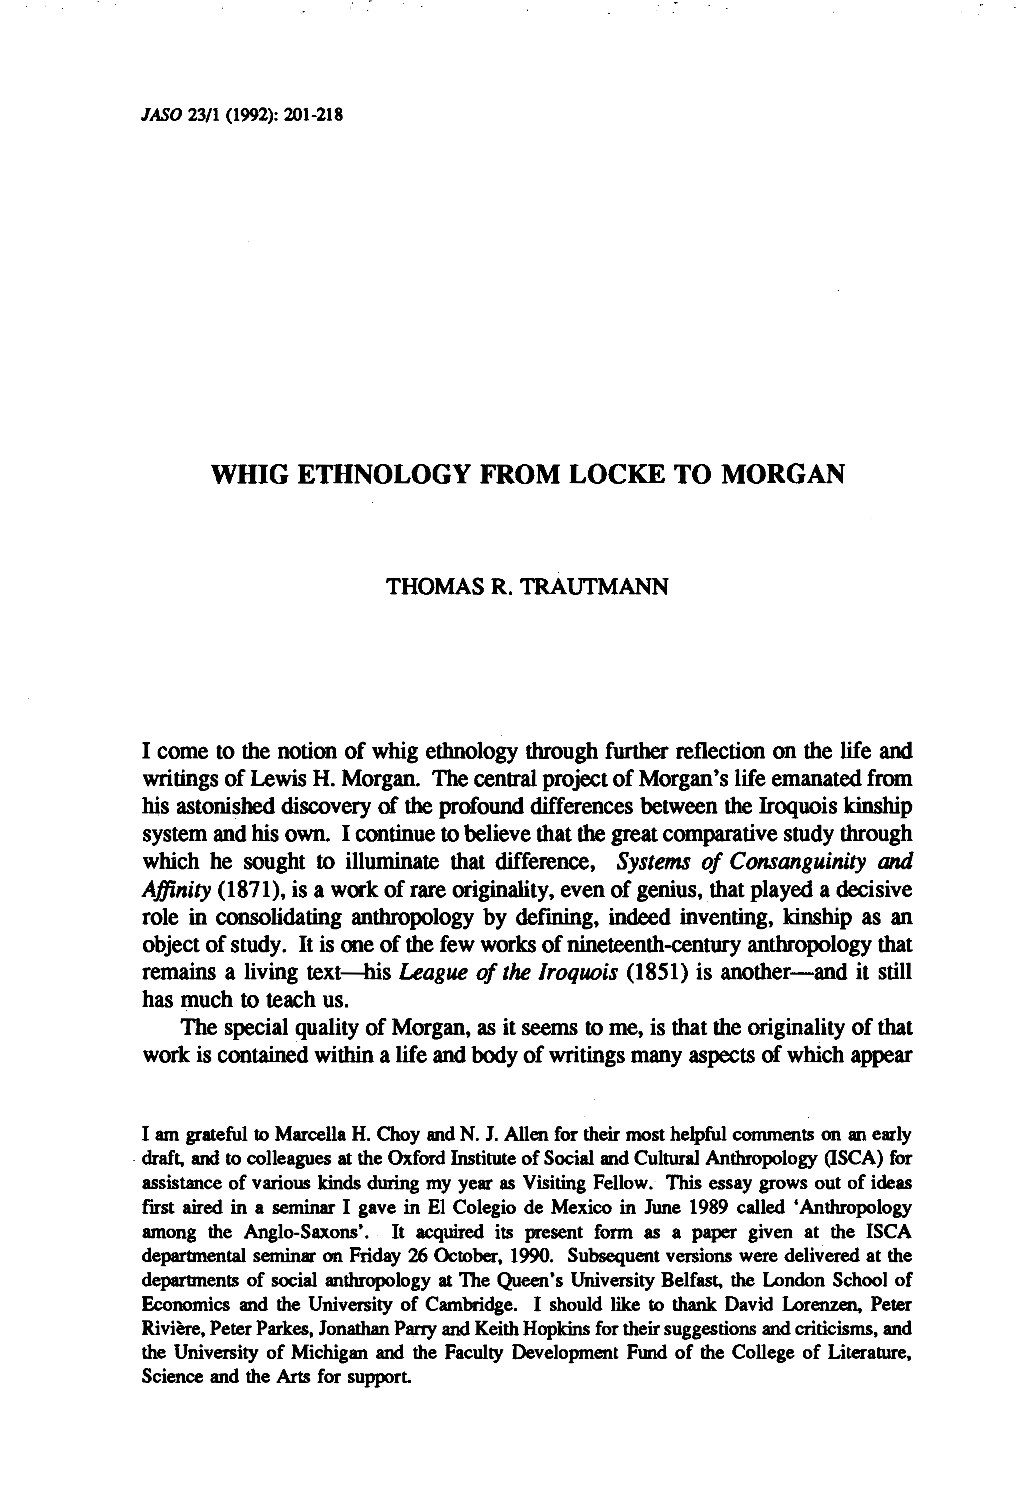 Whig Ethnology from Locke to Morgan